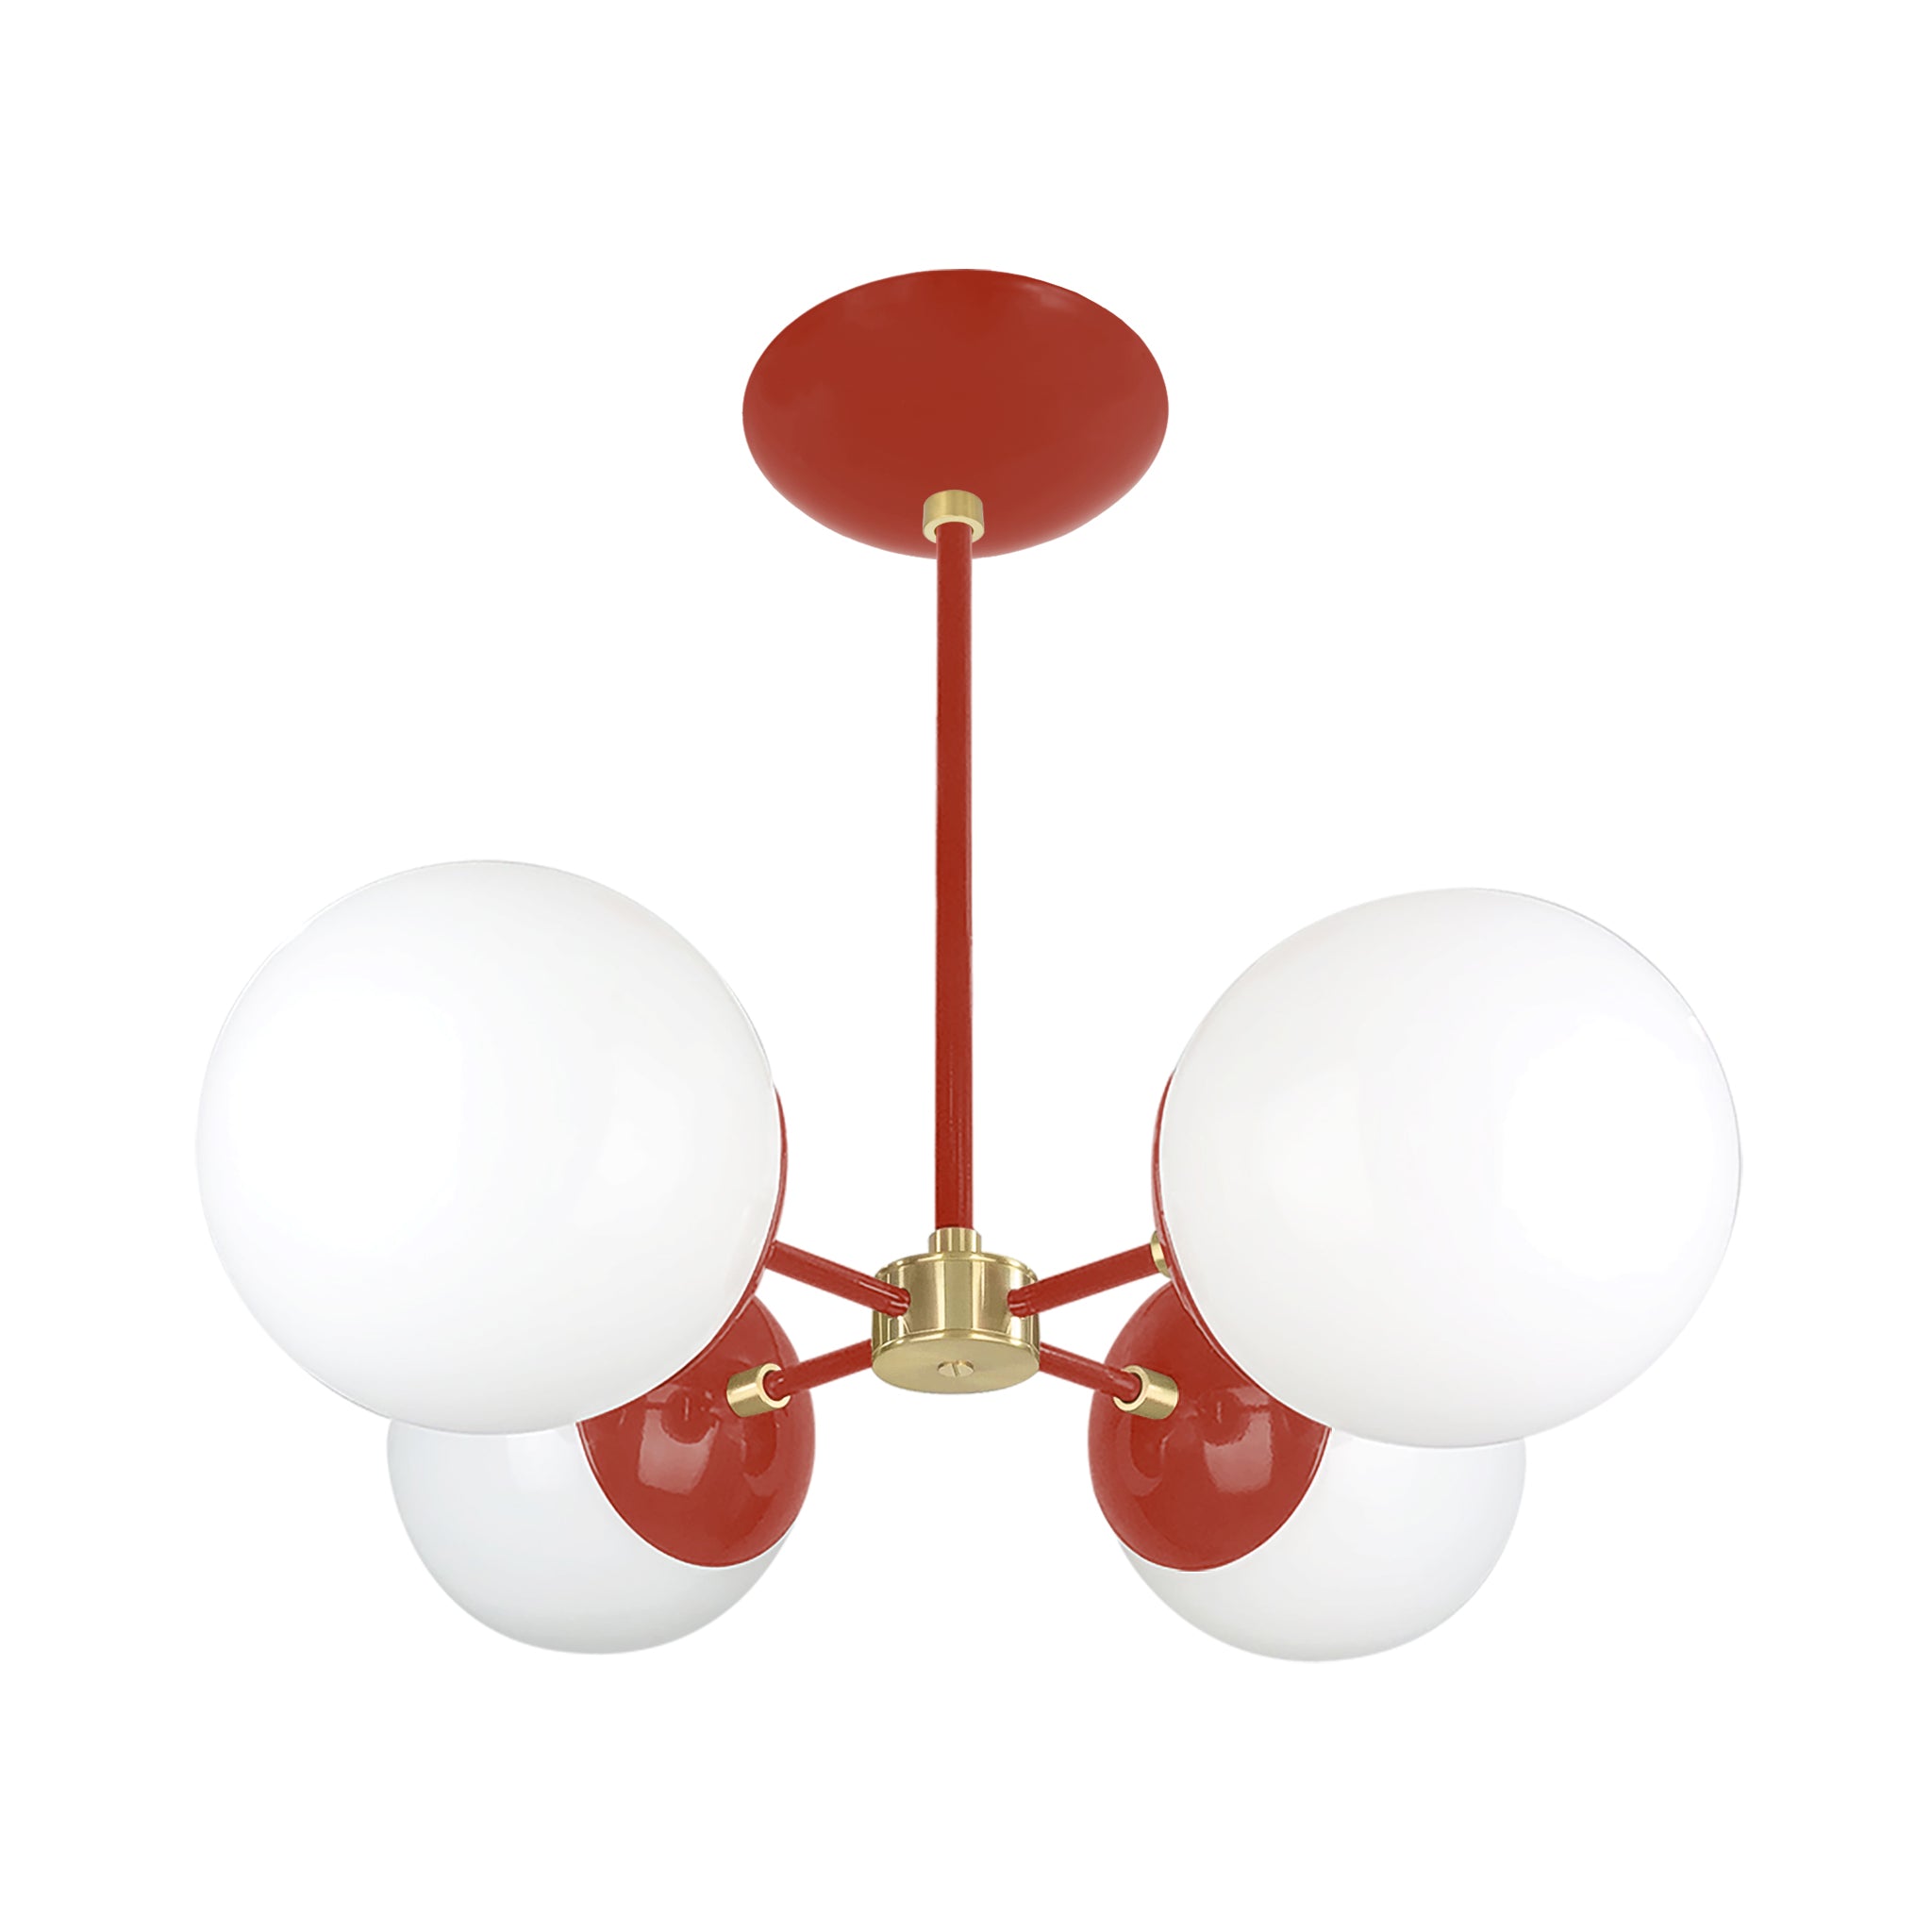 Brass and riding hood red color Orbi chandelier Dutton Brown lighting